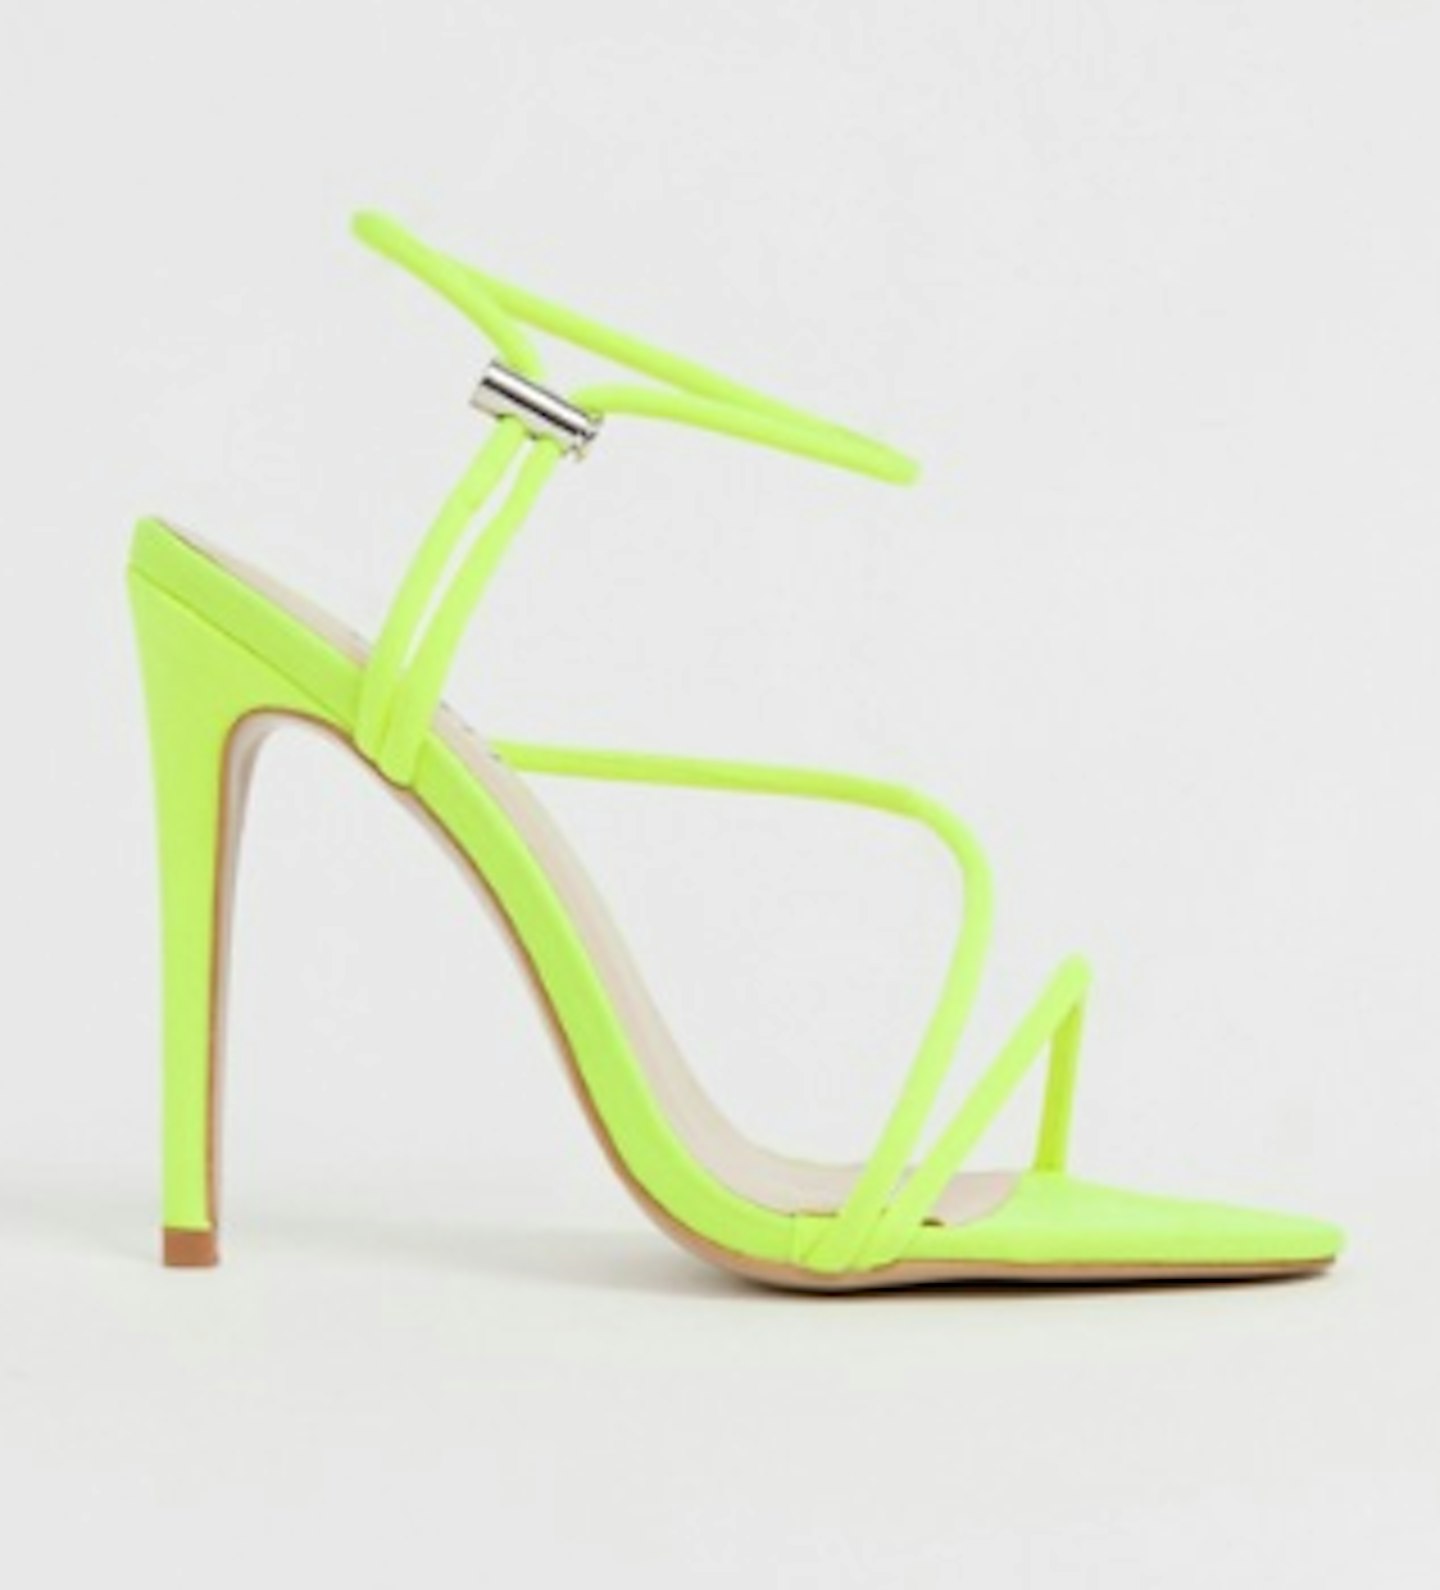 ASOS, Simmi London Cassie Neon Yellow Toggle Detail Heeled Sandals, £32